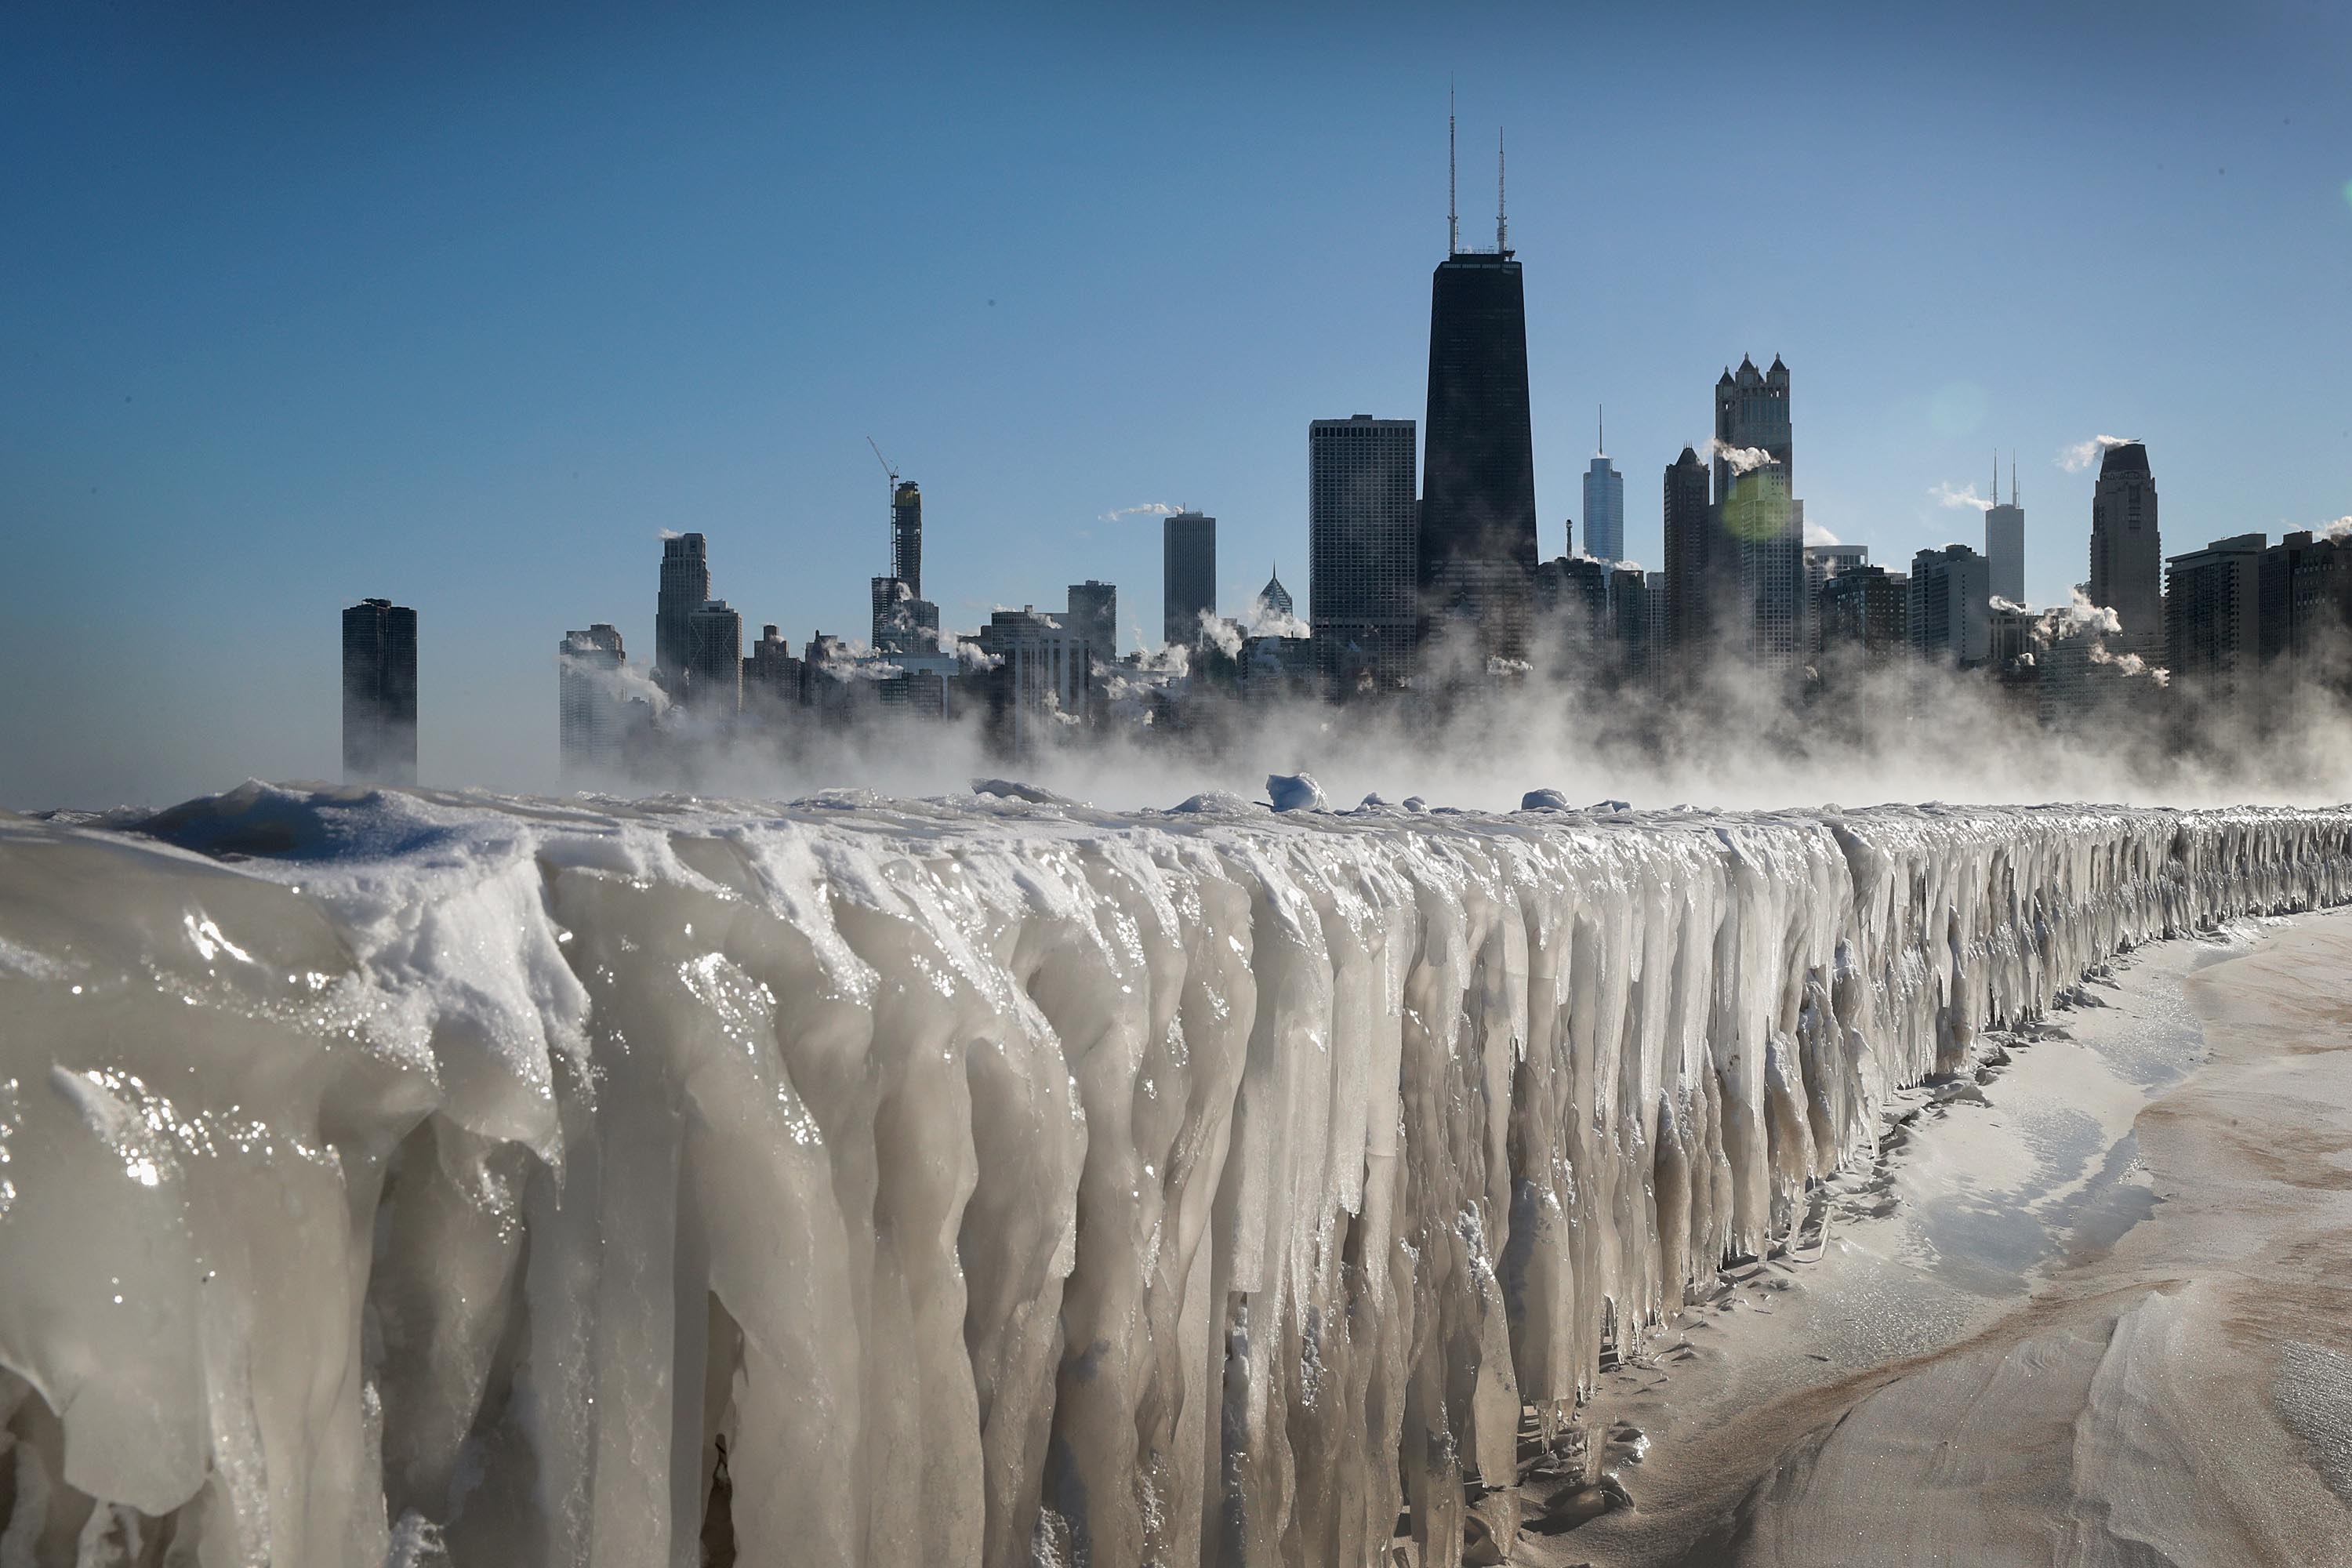 Ice covers the Lake Michigan shorelinein Chicago, Illinois. Businesses and schools have closed, Amtrak has suspended service into the city, more than a thousand flights have been cancelled and mail delivery has been suspended as the city copes with record-setting low temperatures. (Scott Olson/Getty Images)